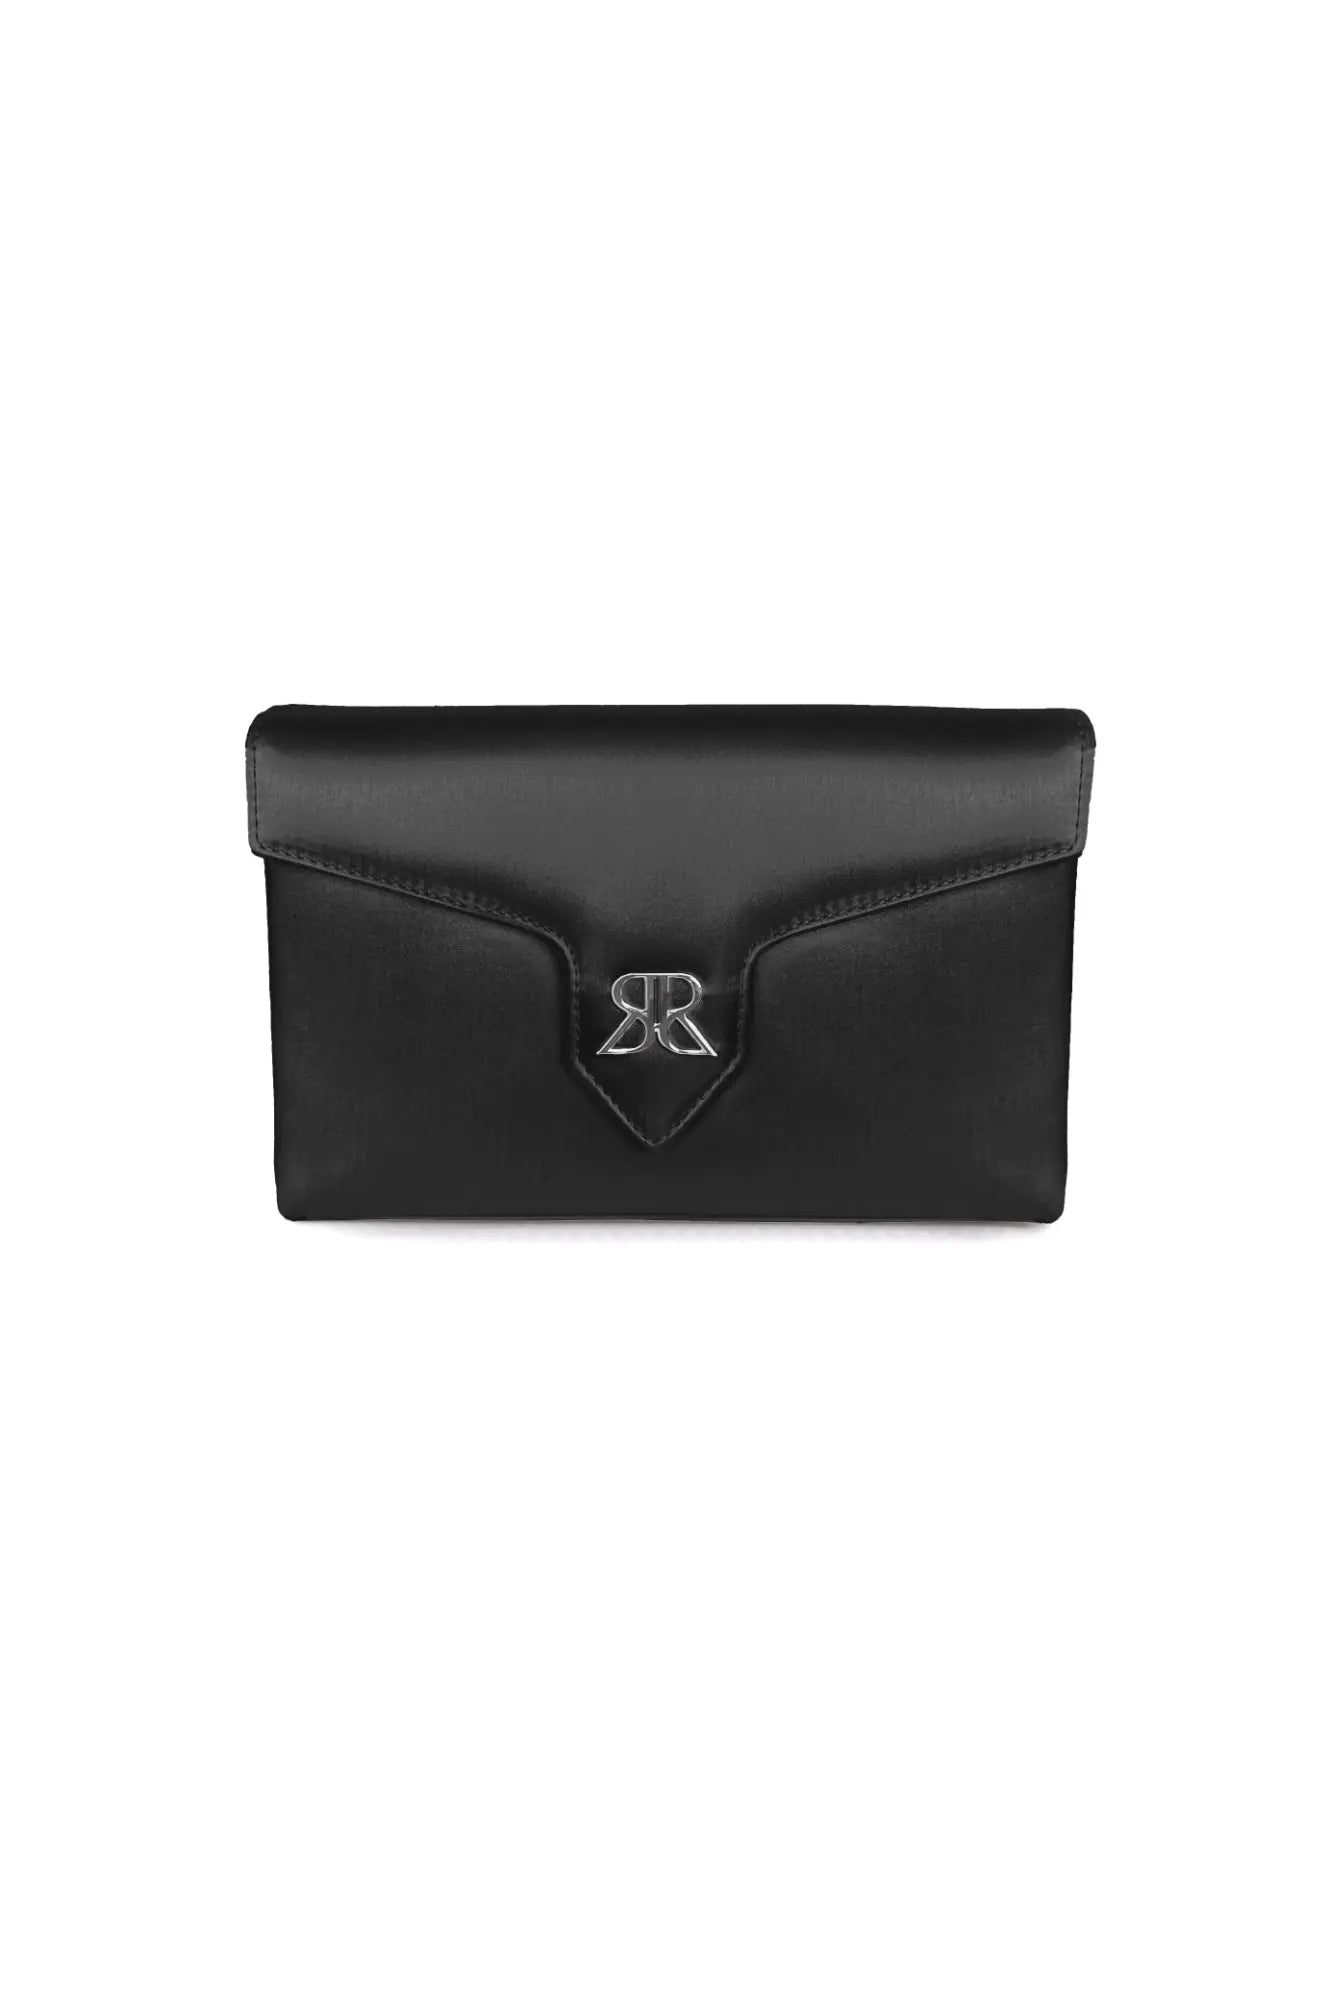 Love Note Envelope Clutch Black from The Bella Rosa Collection with metallic logo detail on a white background.